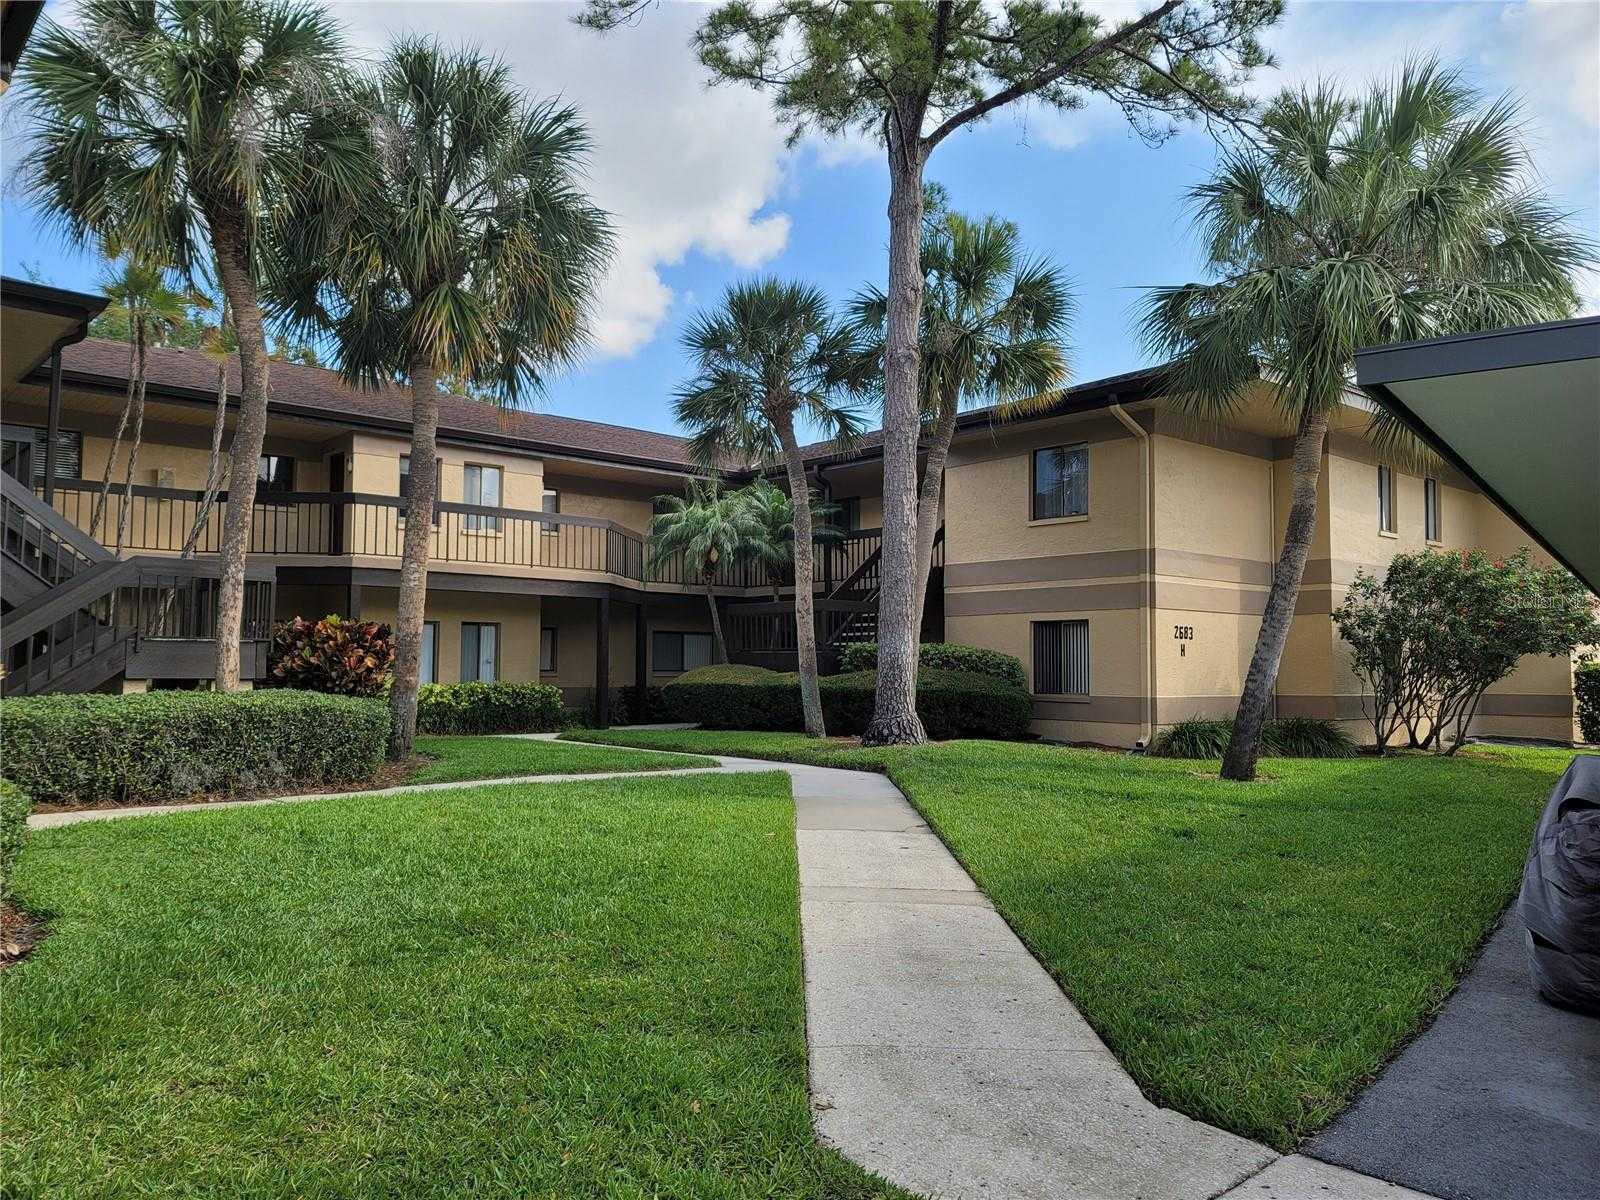 View CLEARWATER, FL 33761 condo